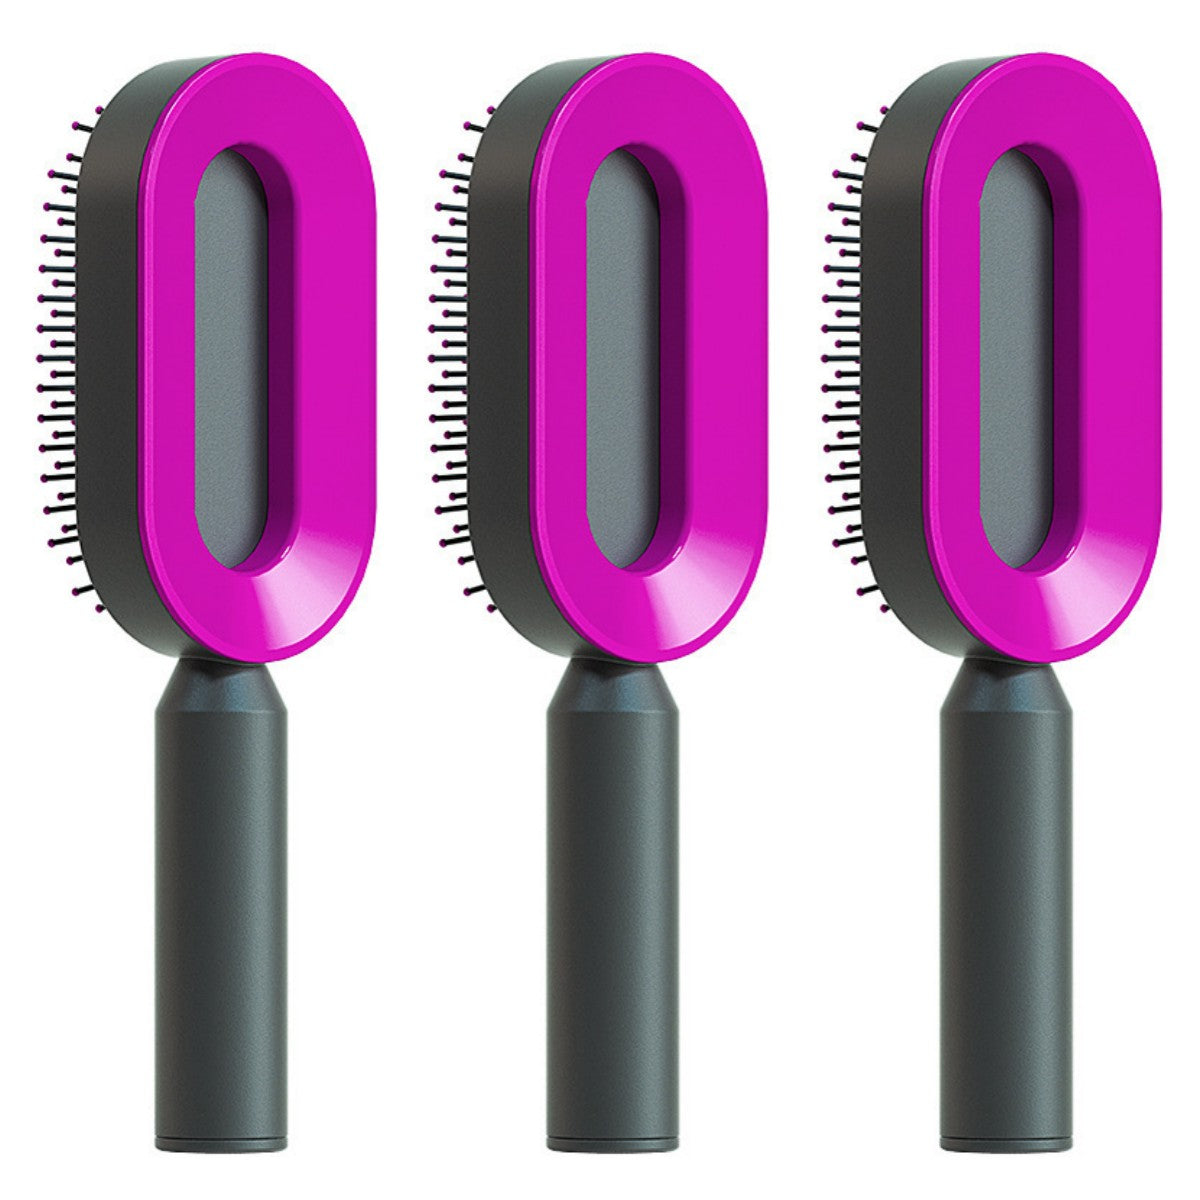 Self-Cleaning Hairbrush for Women. One-key Cleaning Airbag Massage Scalp Comb Anti-Static Hairbrush